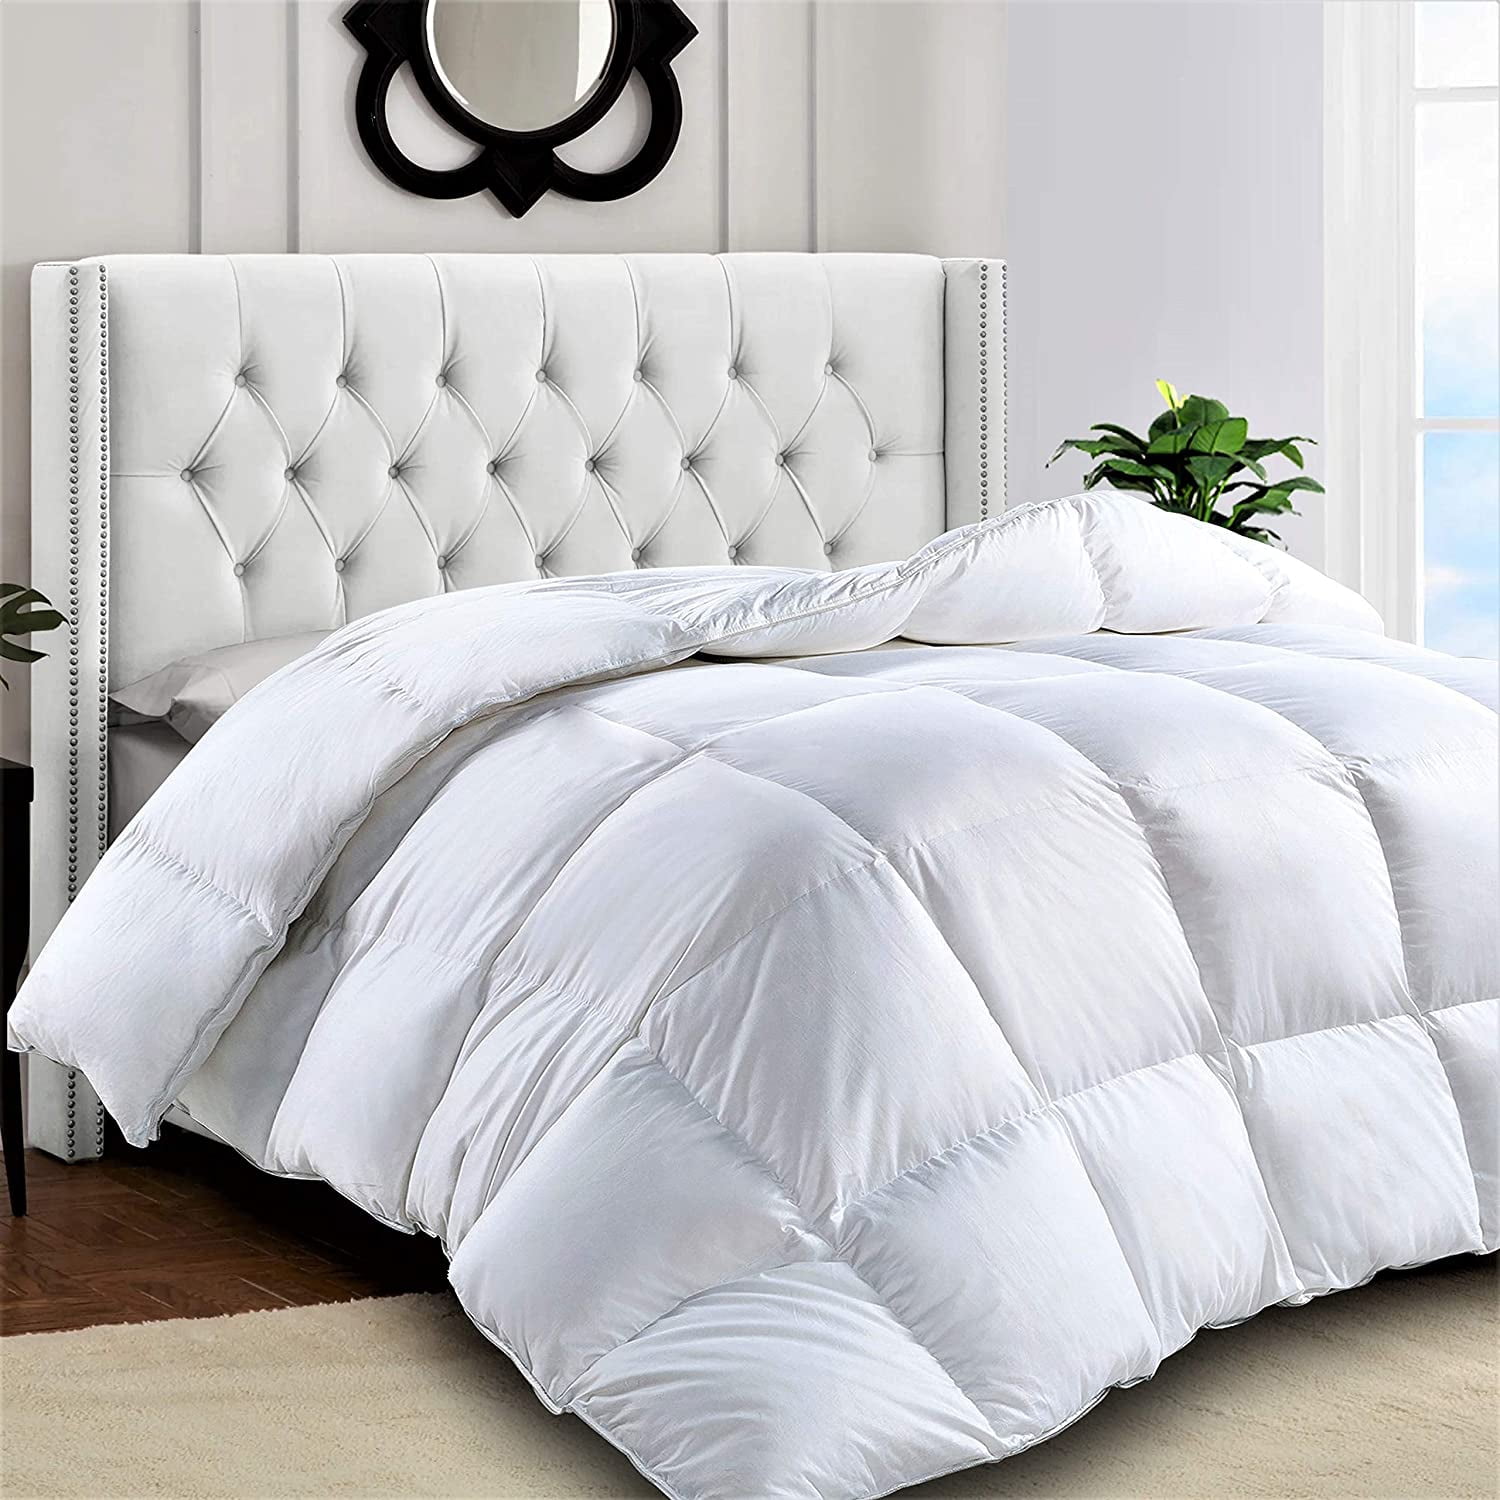 comforter comforters hypoallergenic siliconized fiberfill protects stitched inserts